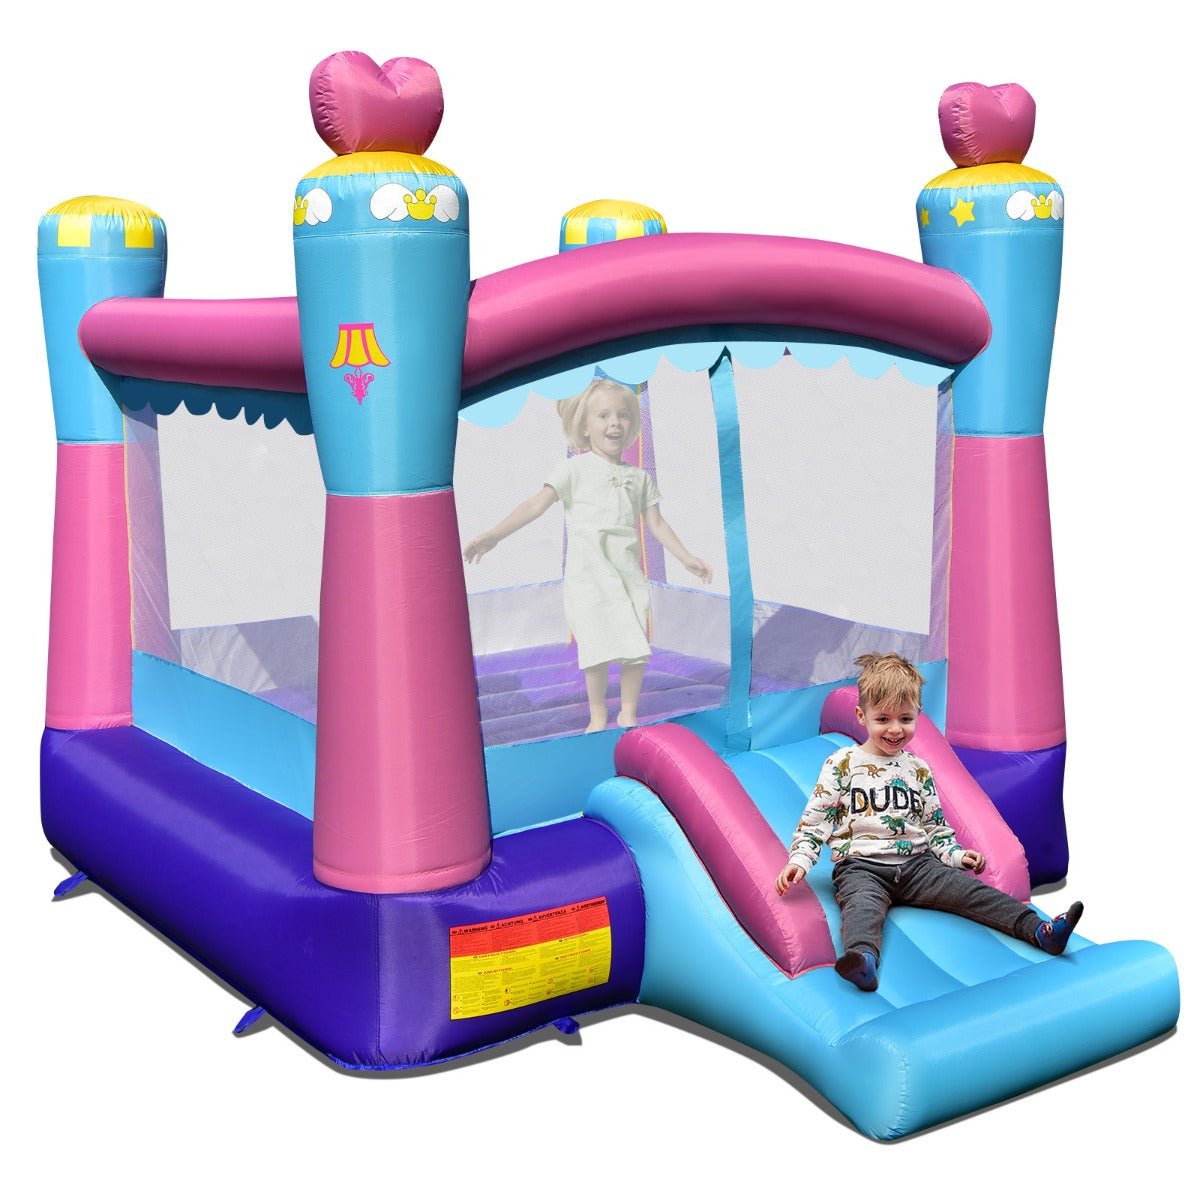 Enchanting Princess Inflatable Castle - Jumping Fun and Play for Children